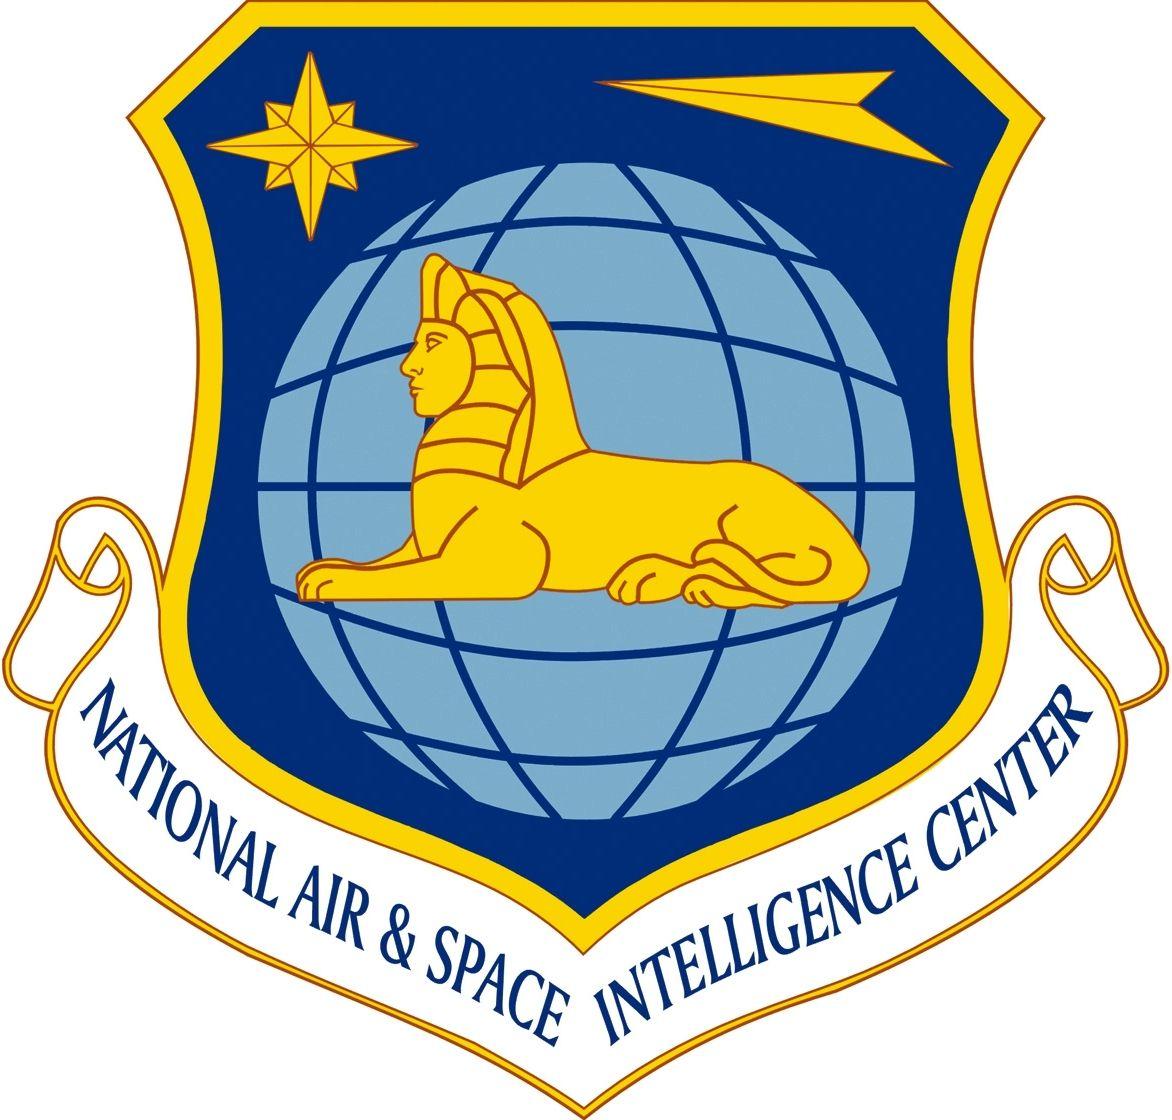 Nasic Logo - National Air and Space Intelligence Center